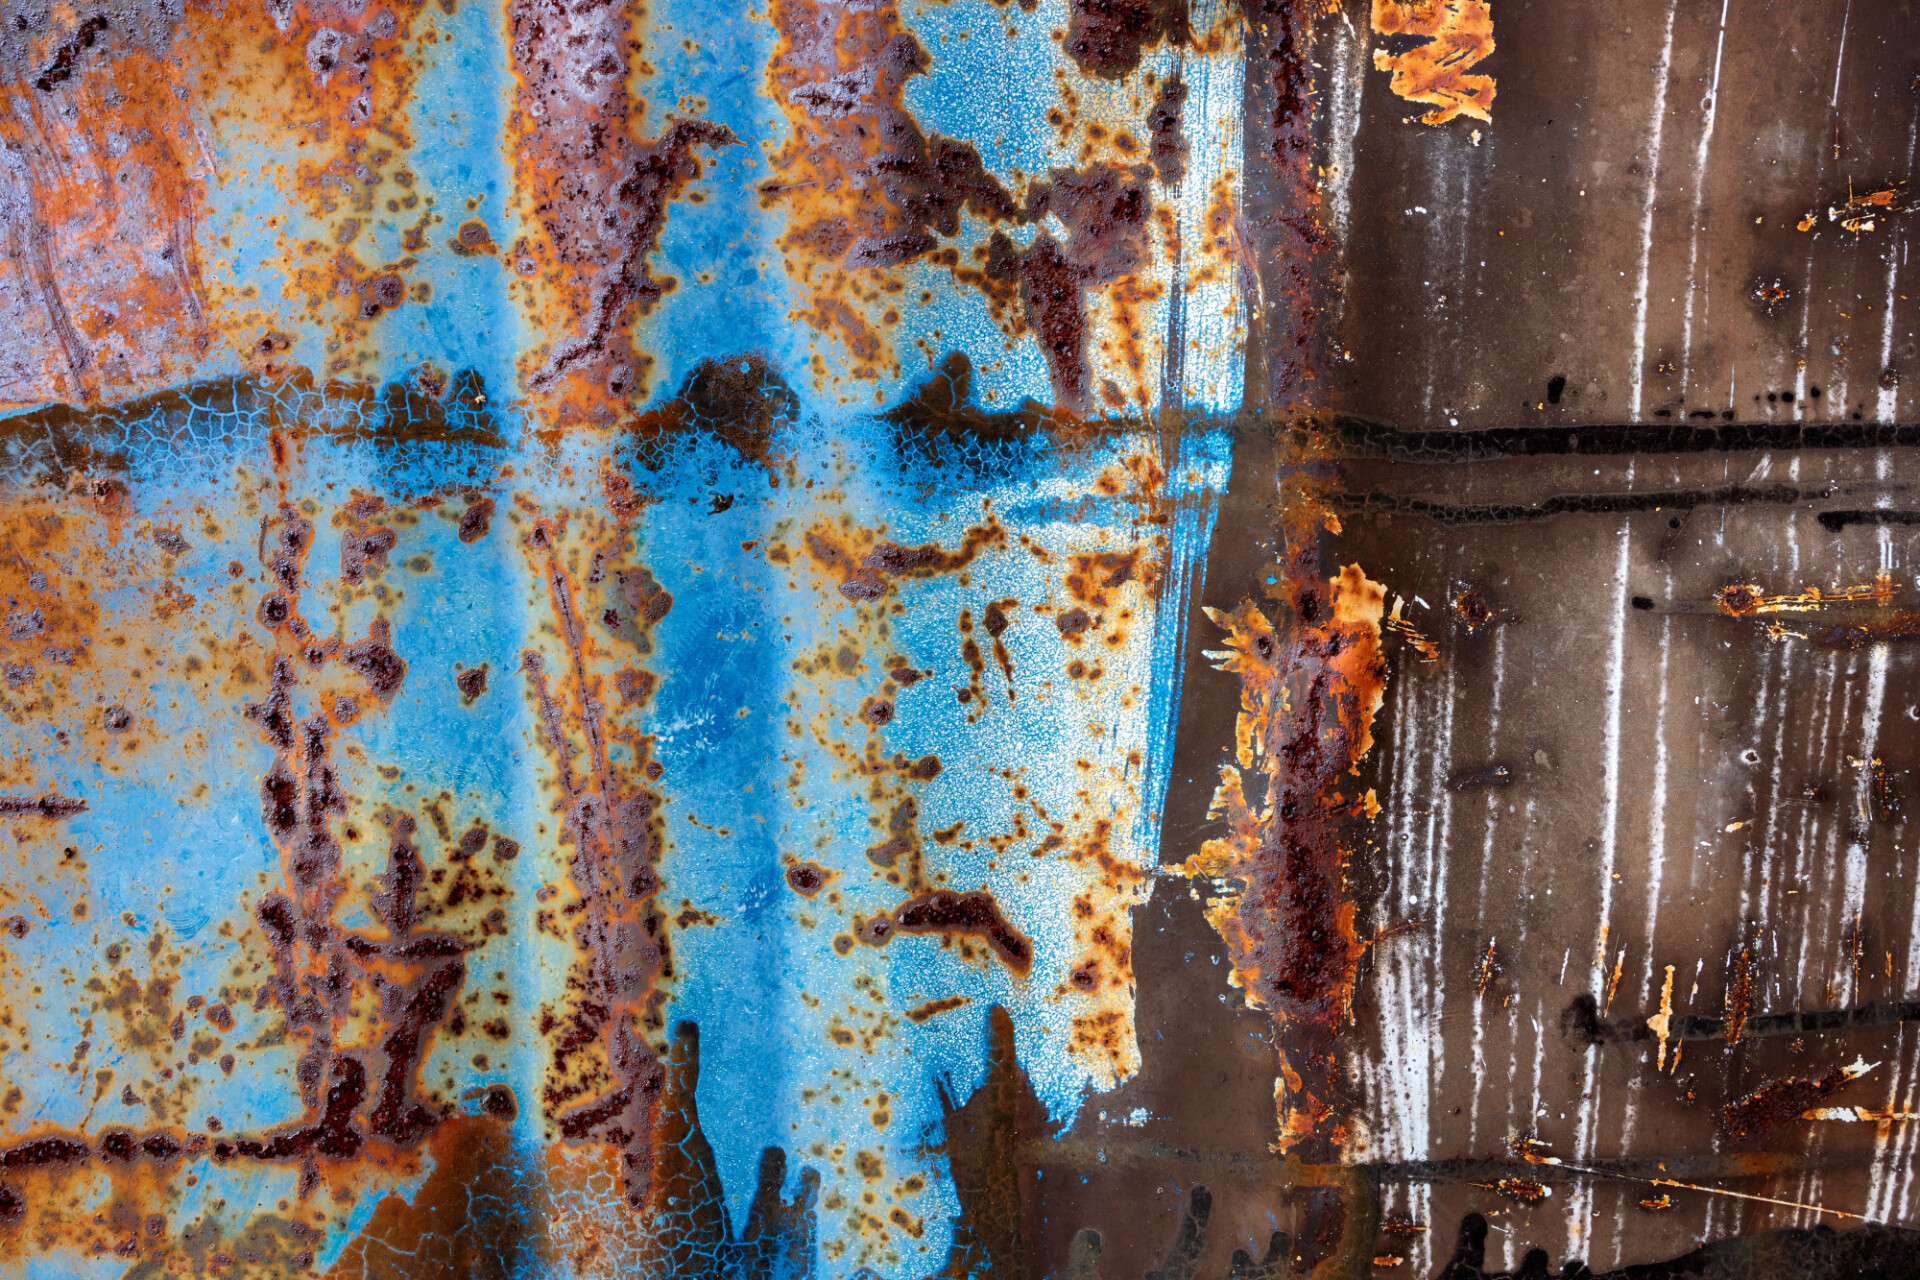 Rusty metal texture with blue paint residue